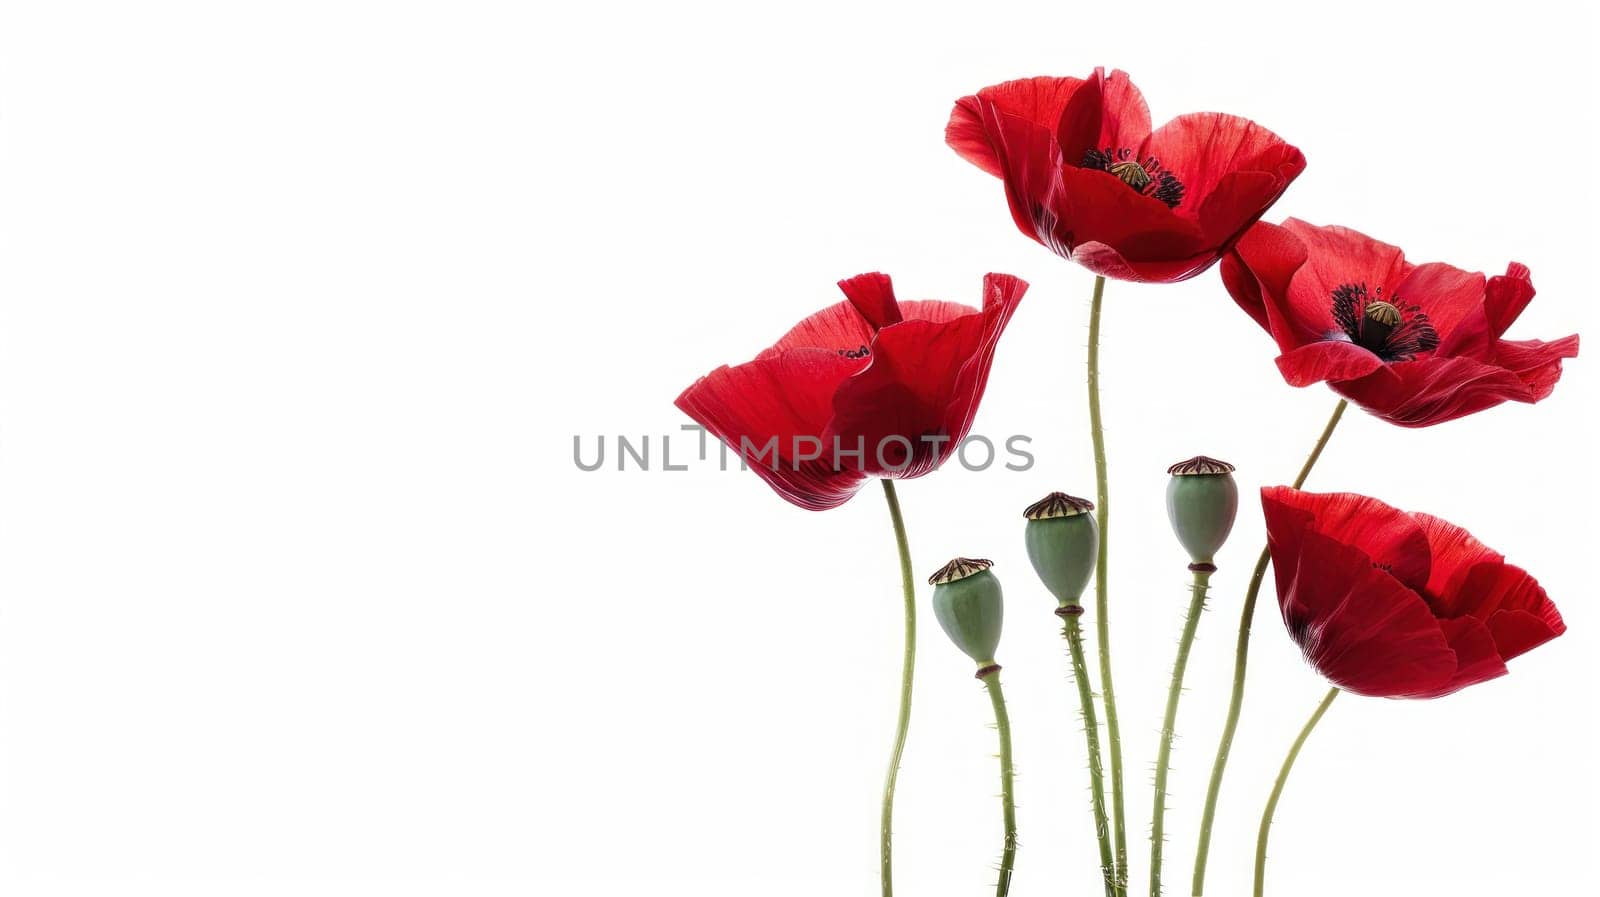 A bouquet of red flowers with a white background.